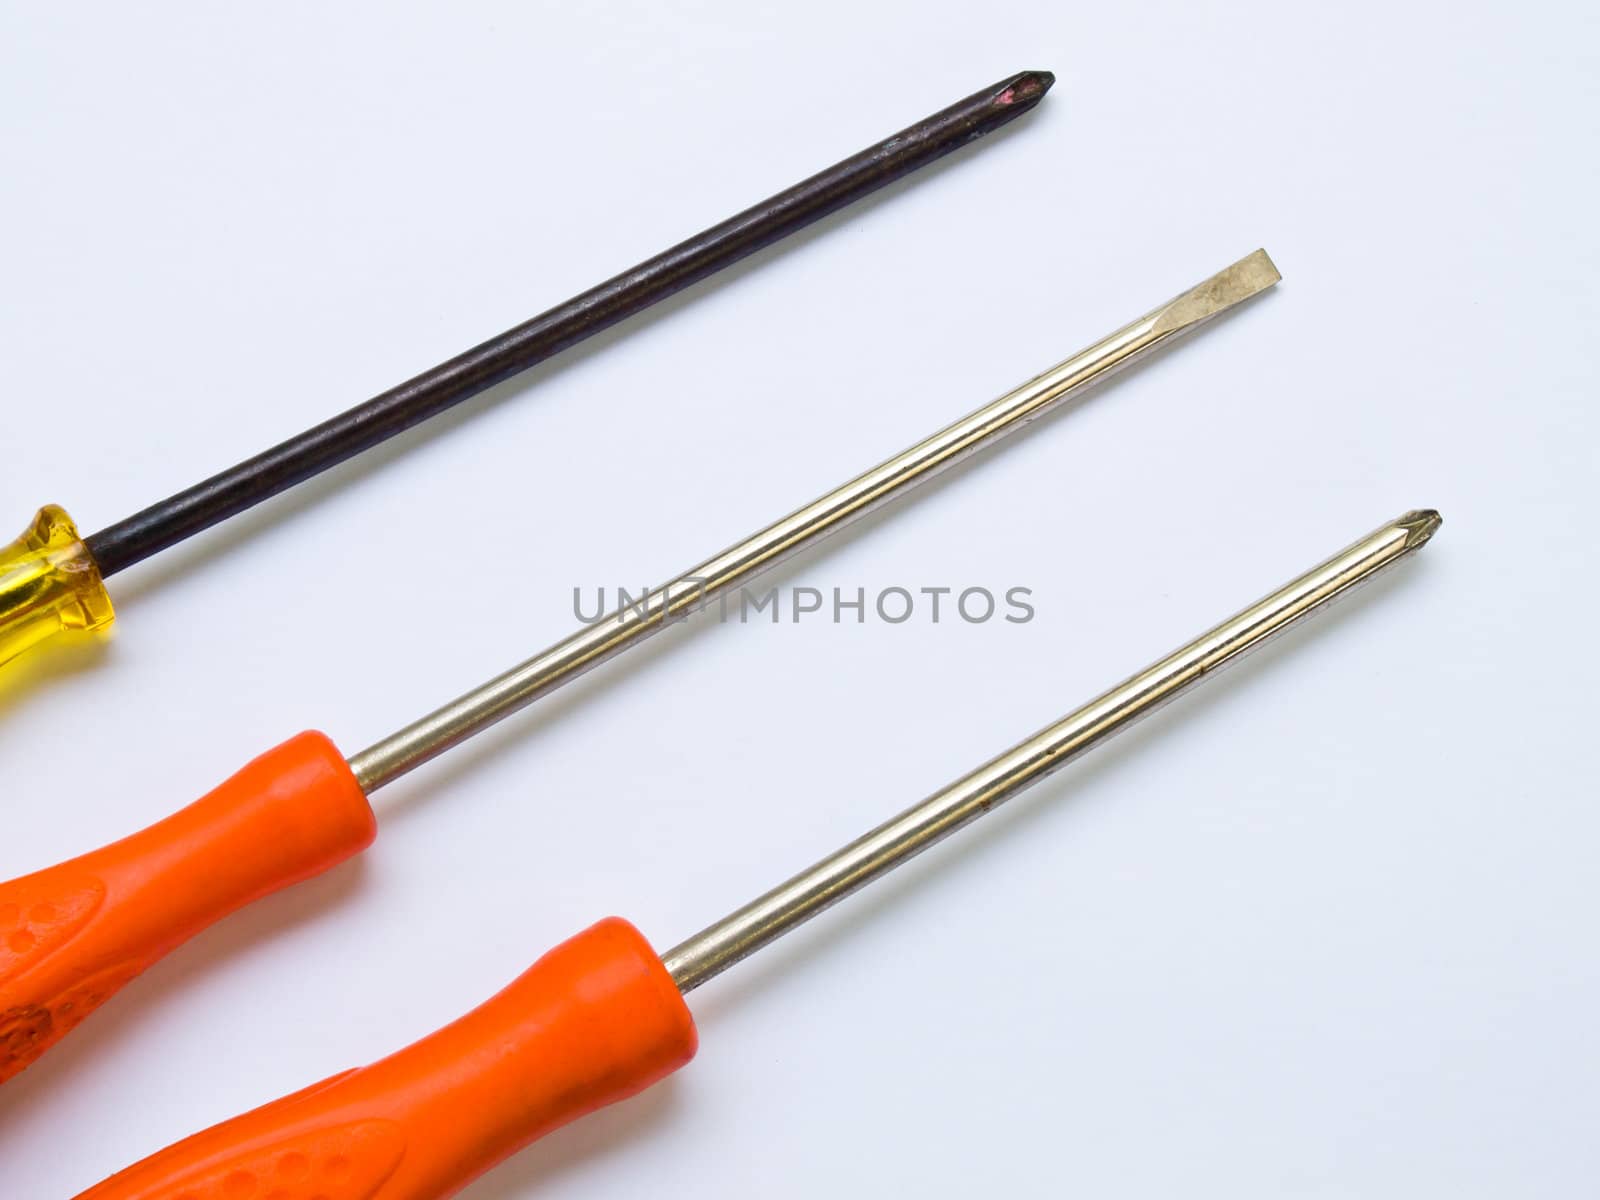 Used screwdrivers isolated on a white background